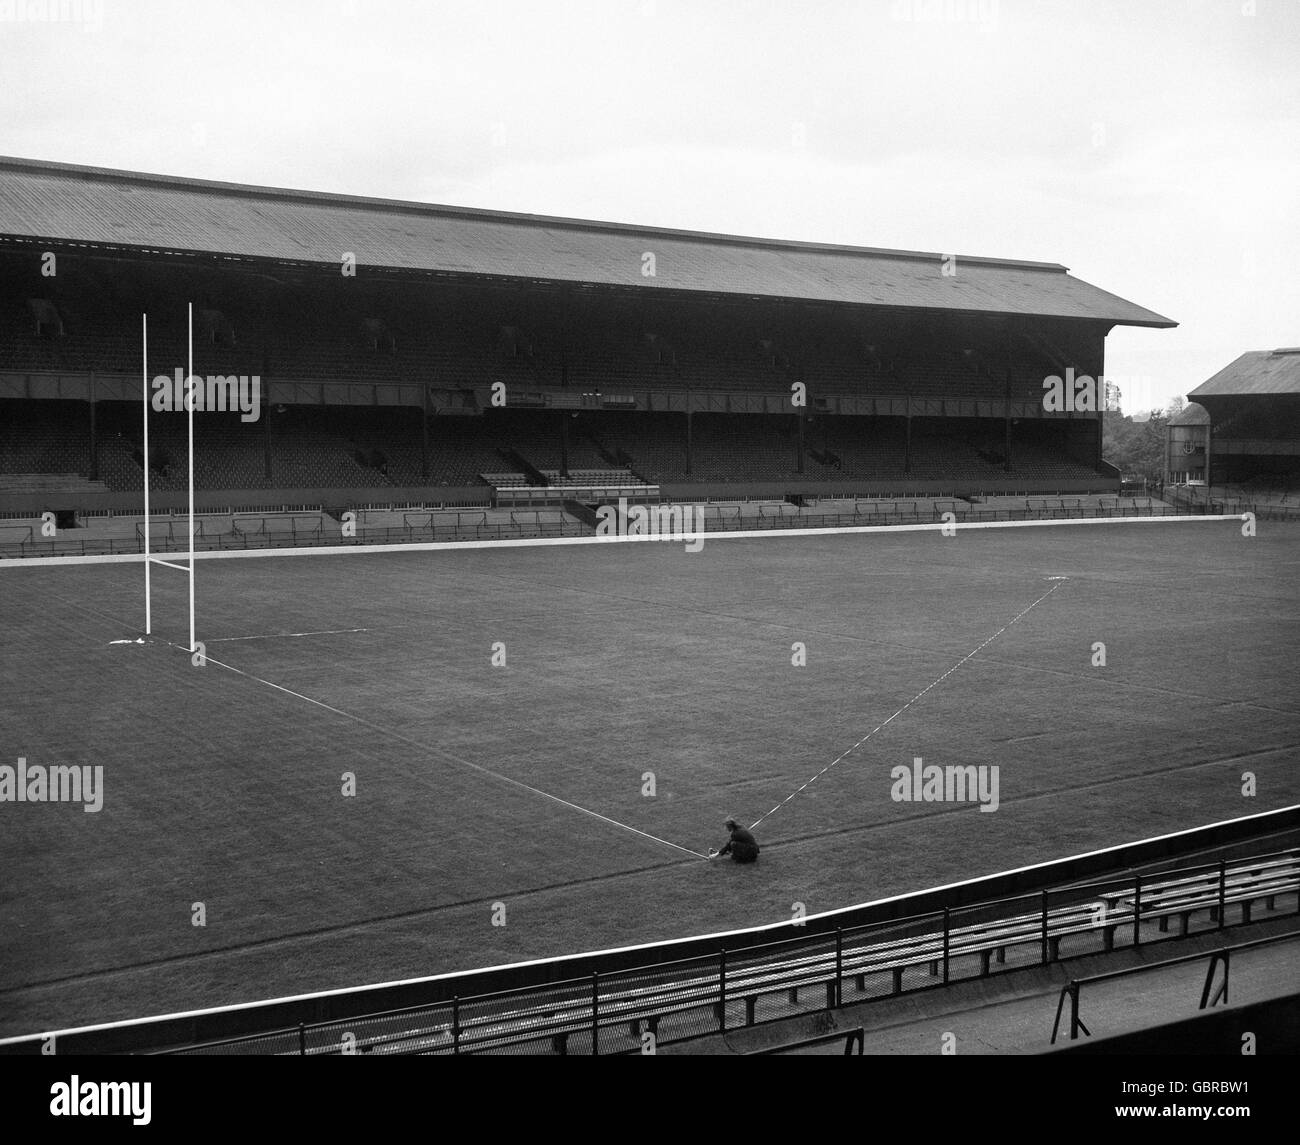 Rugby Union - Measuring Aid - Twickenham. The new sports ground measuring aid made for rugby pitches being used at Twickenham. Stock Photo